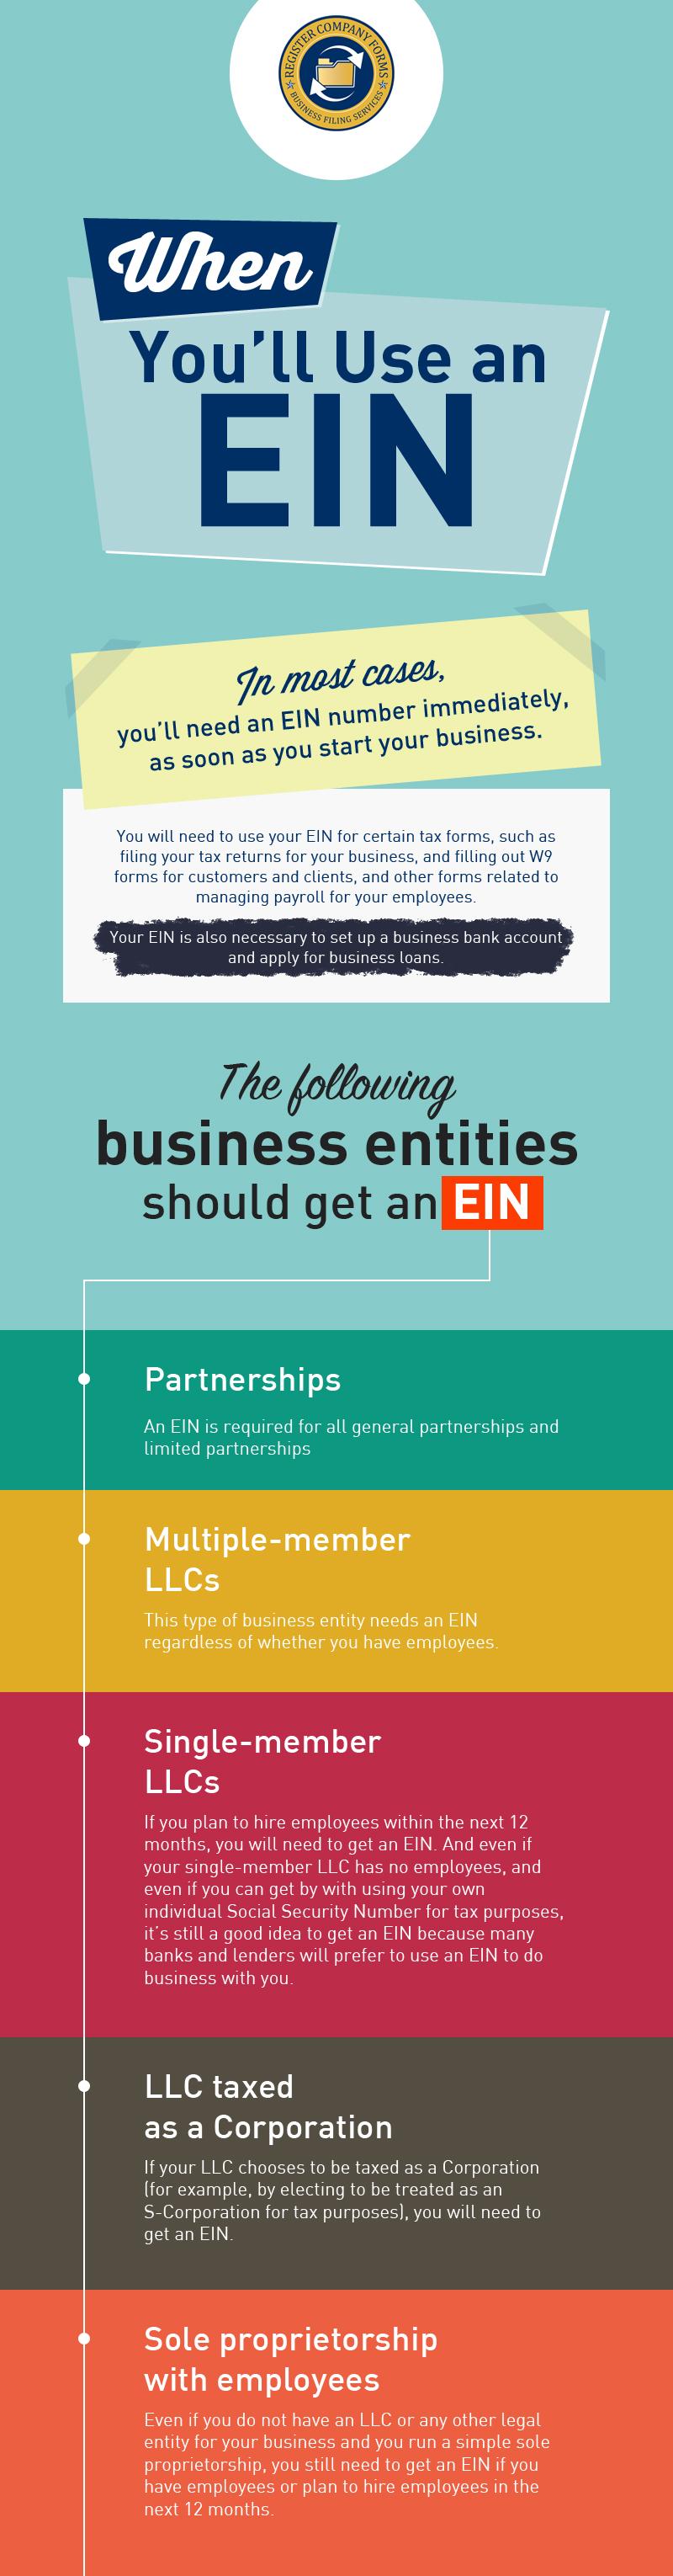 When You’ll Use an EIN (Employer Identification Number) for Business Entities?